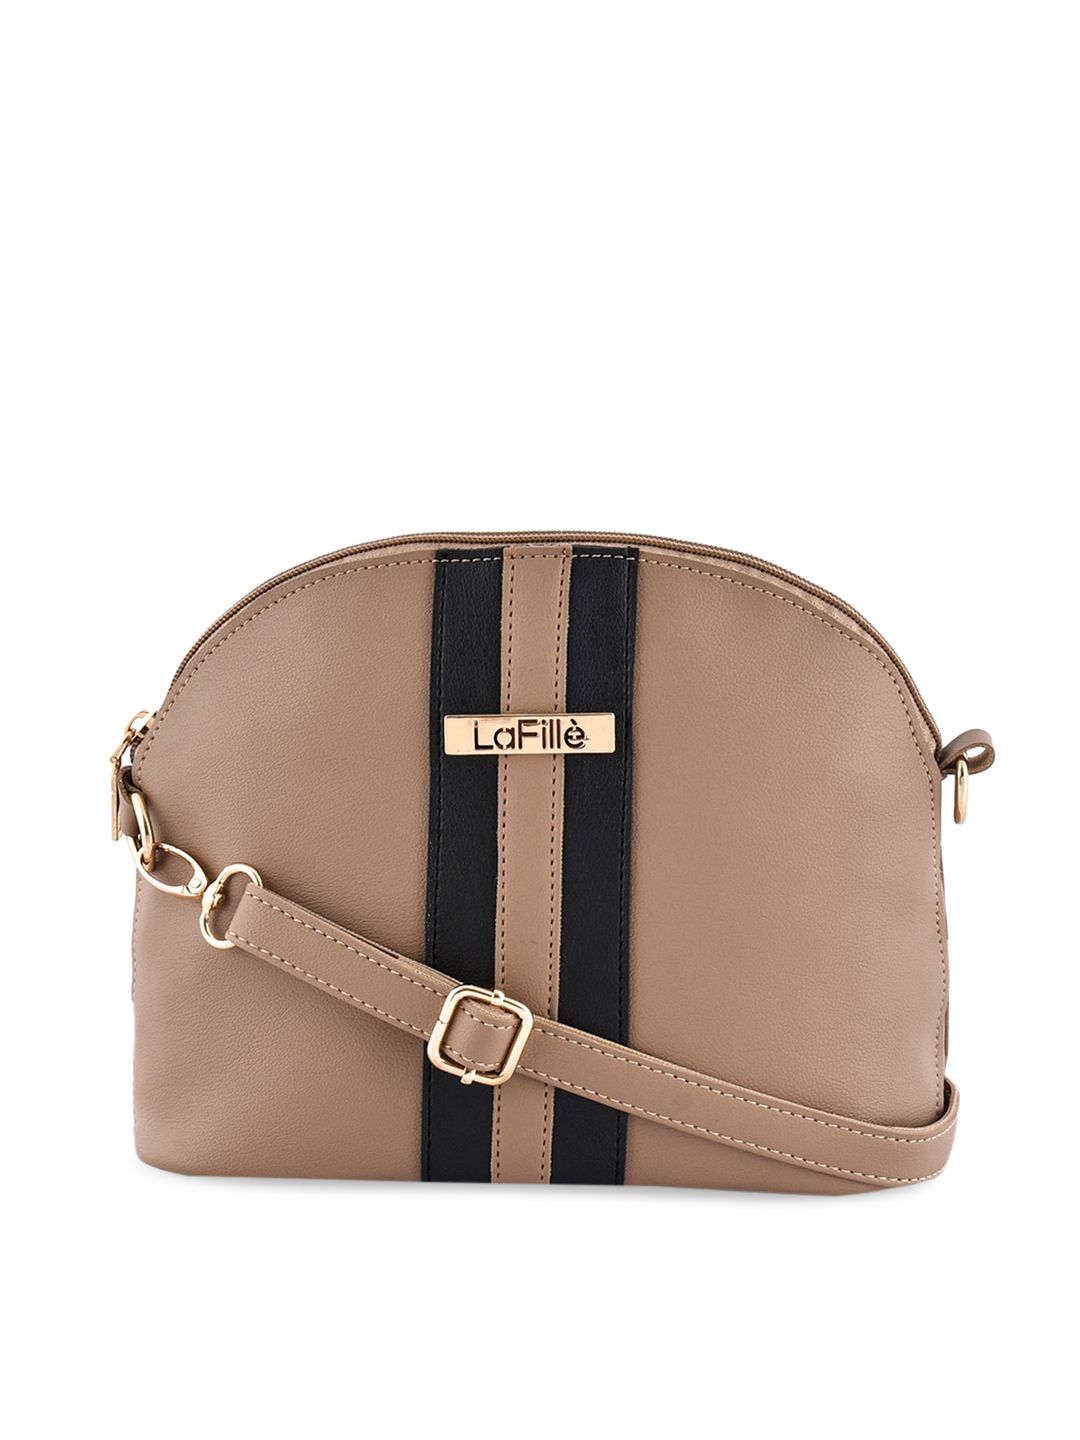 LaFille Beige PU Structured Sling Bag Price in India